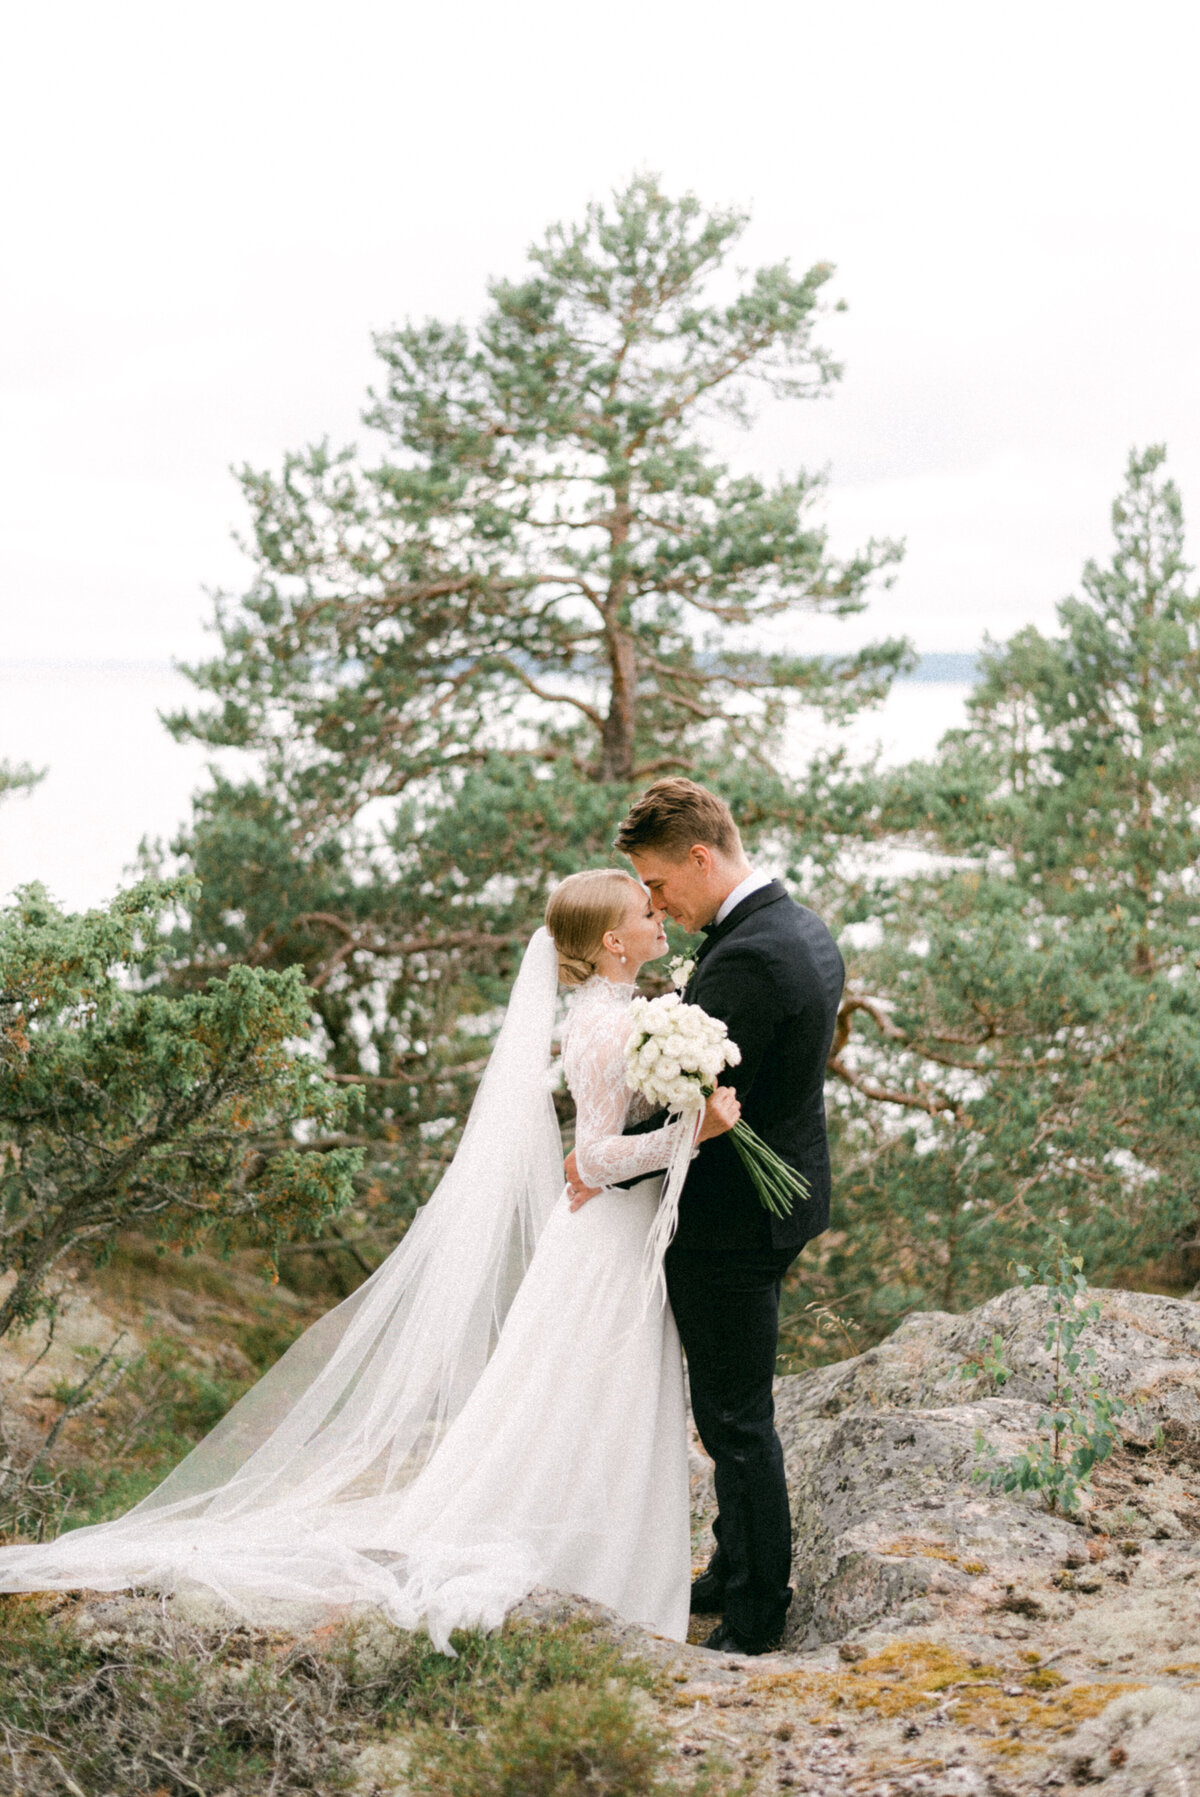 Image of a wedding couple in the forest by the sea photographed by wedding photographer Hannika Gabielsson.